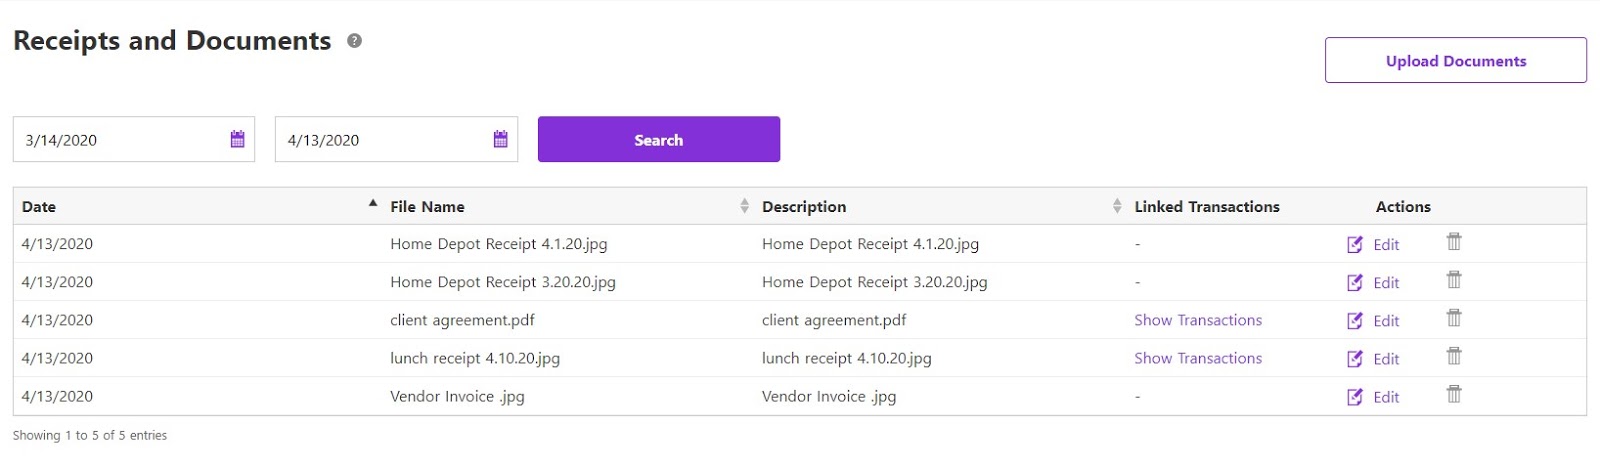 receipts and documents in Patriot Software